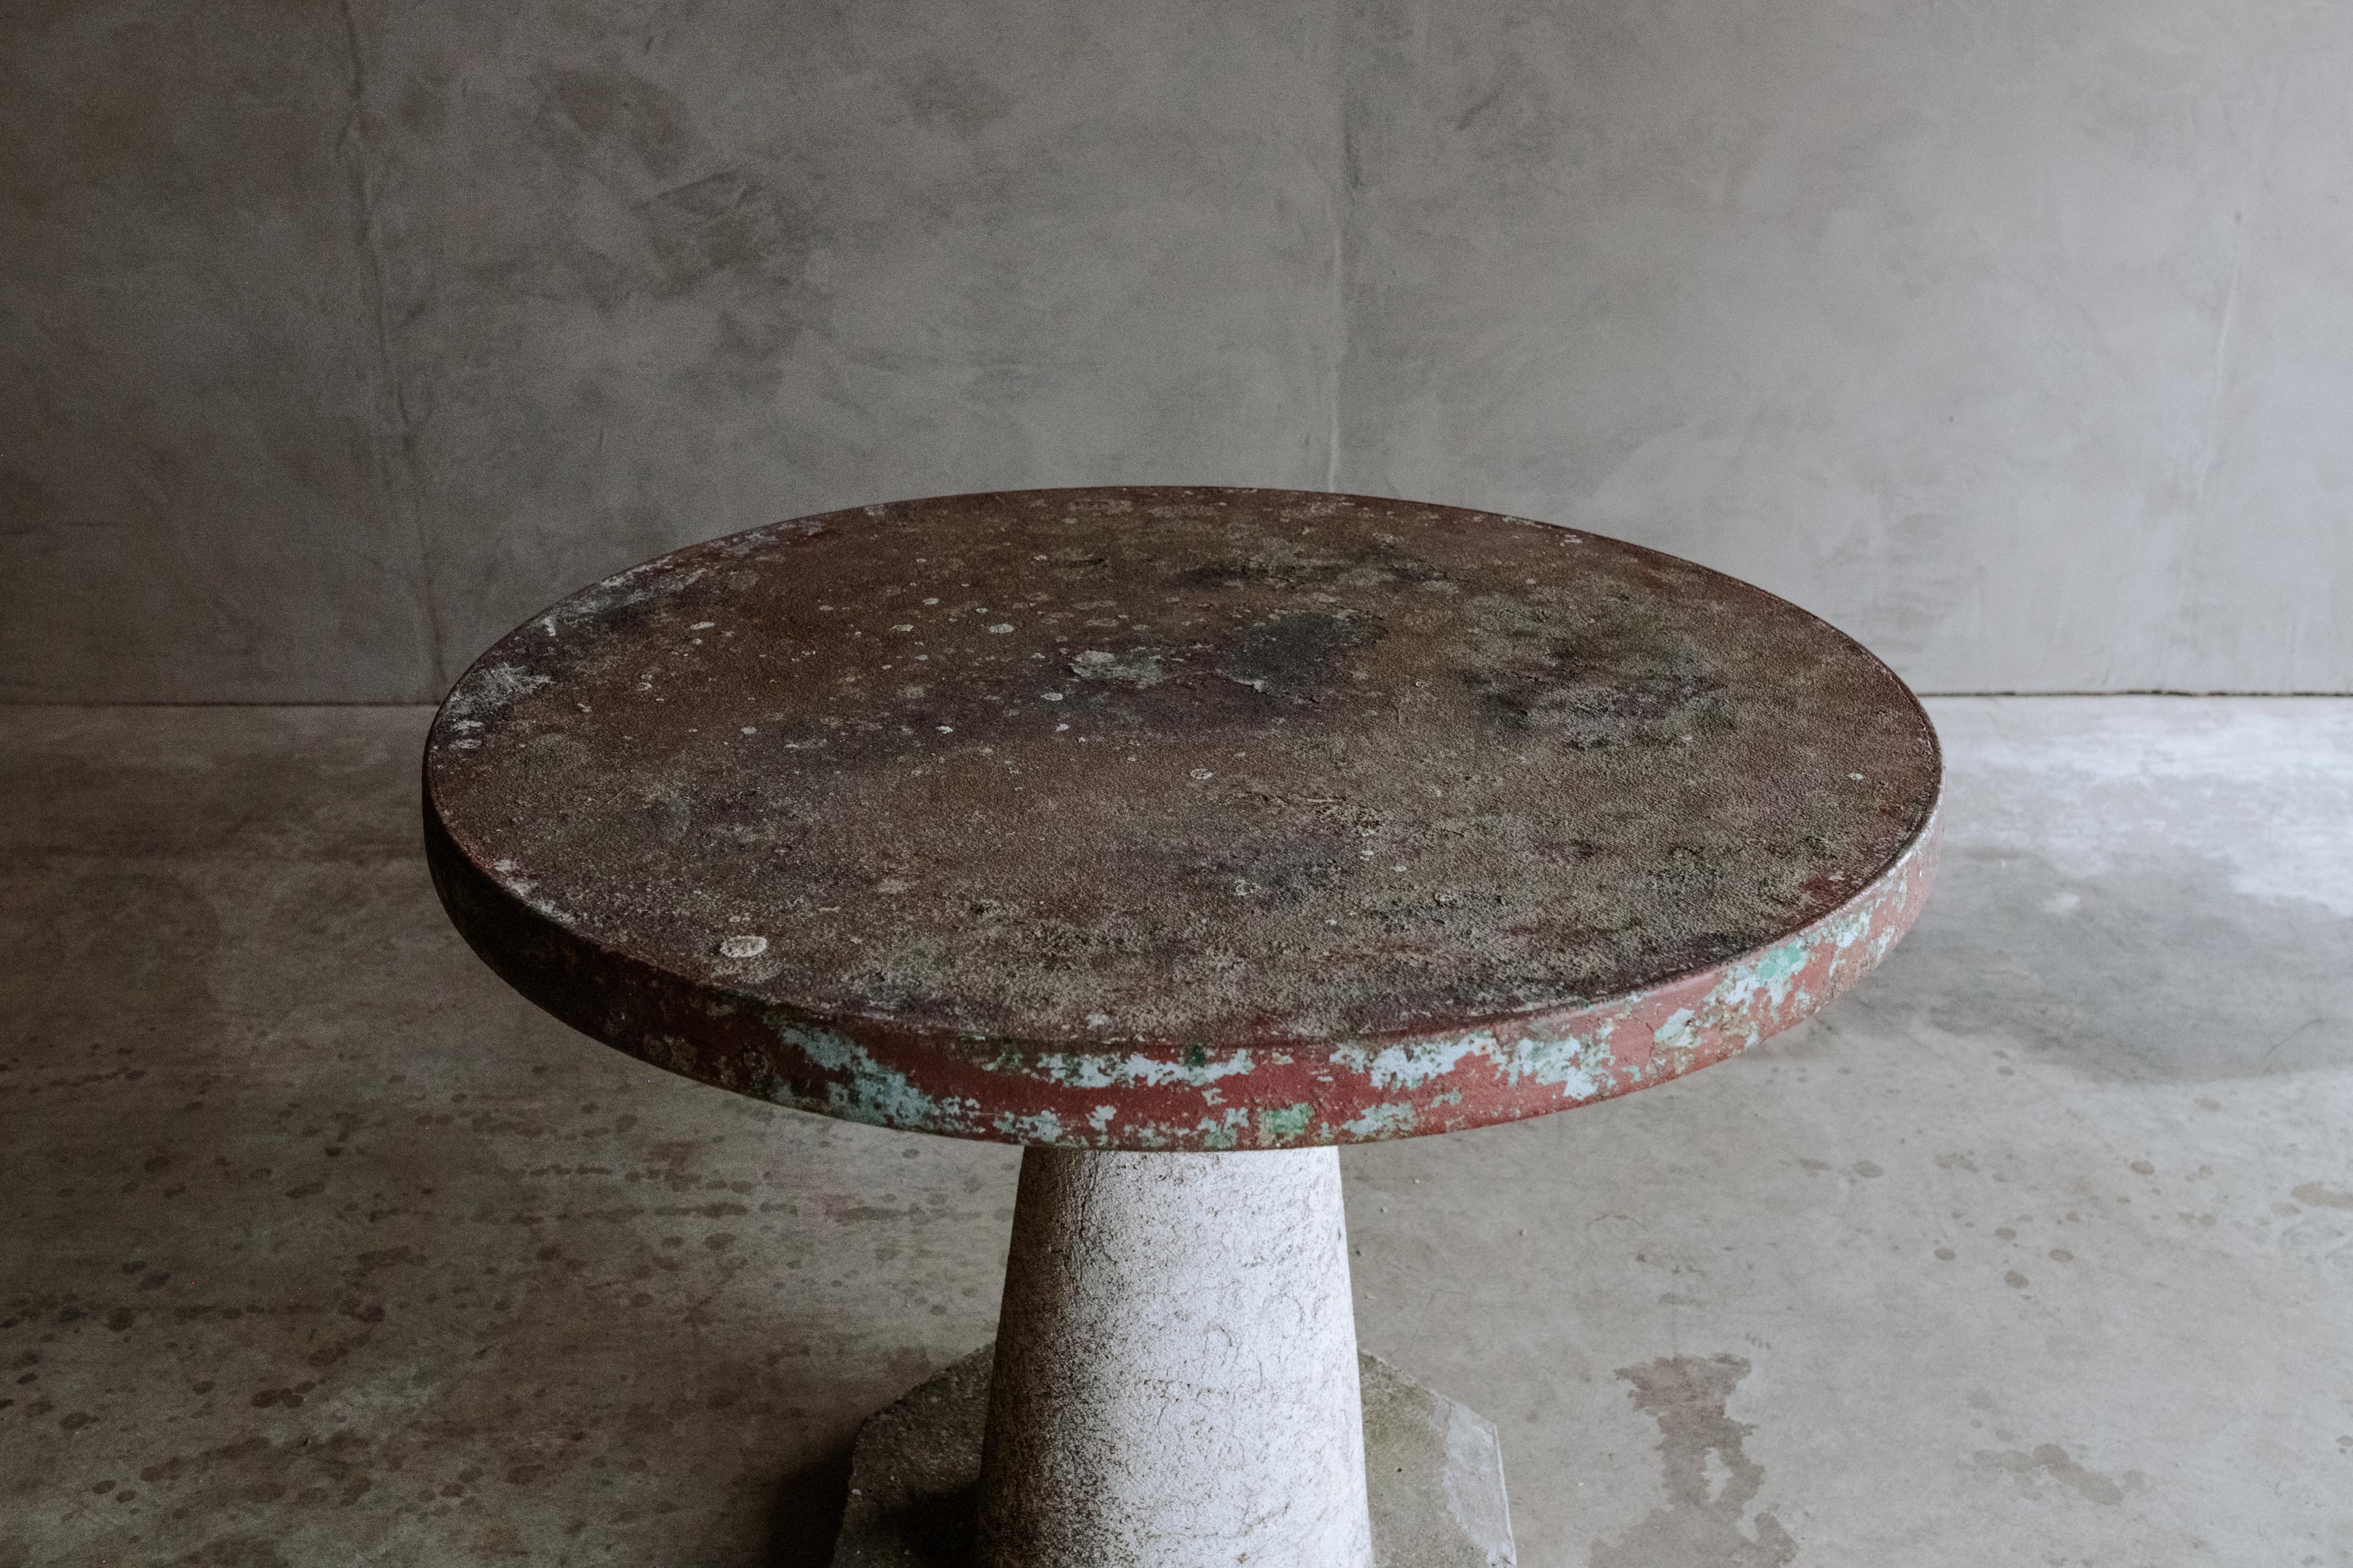 Vintage garden table from France, Circa 1950. Superb original color and patina.